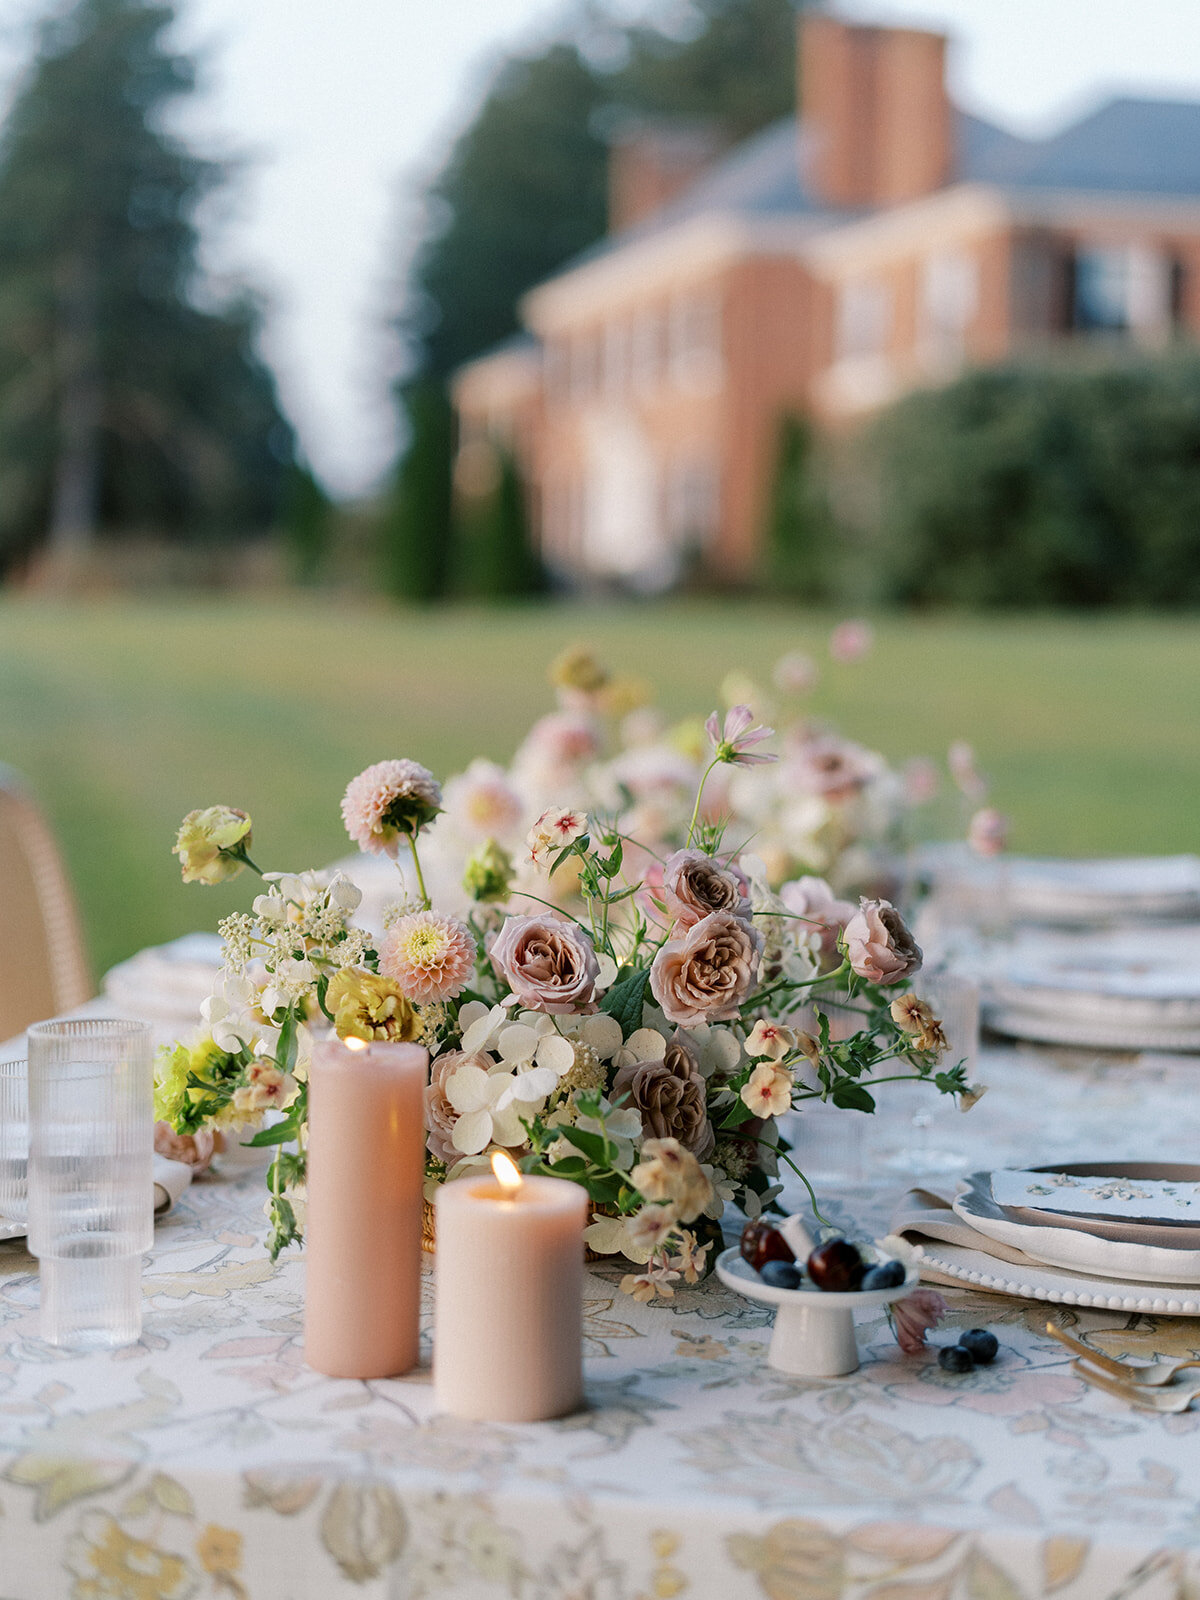 Long table with floral-patterned linen with blush pillar candles, fresh fruit and blush, taupe, cream and mauve wispy floral compotes going down the length of the table.